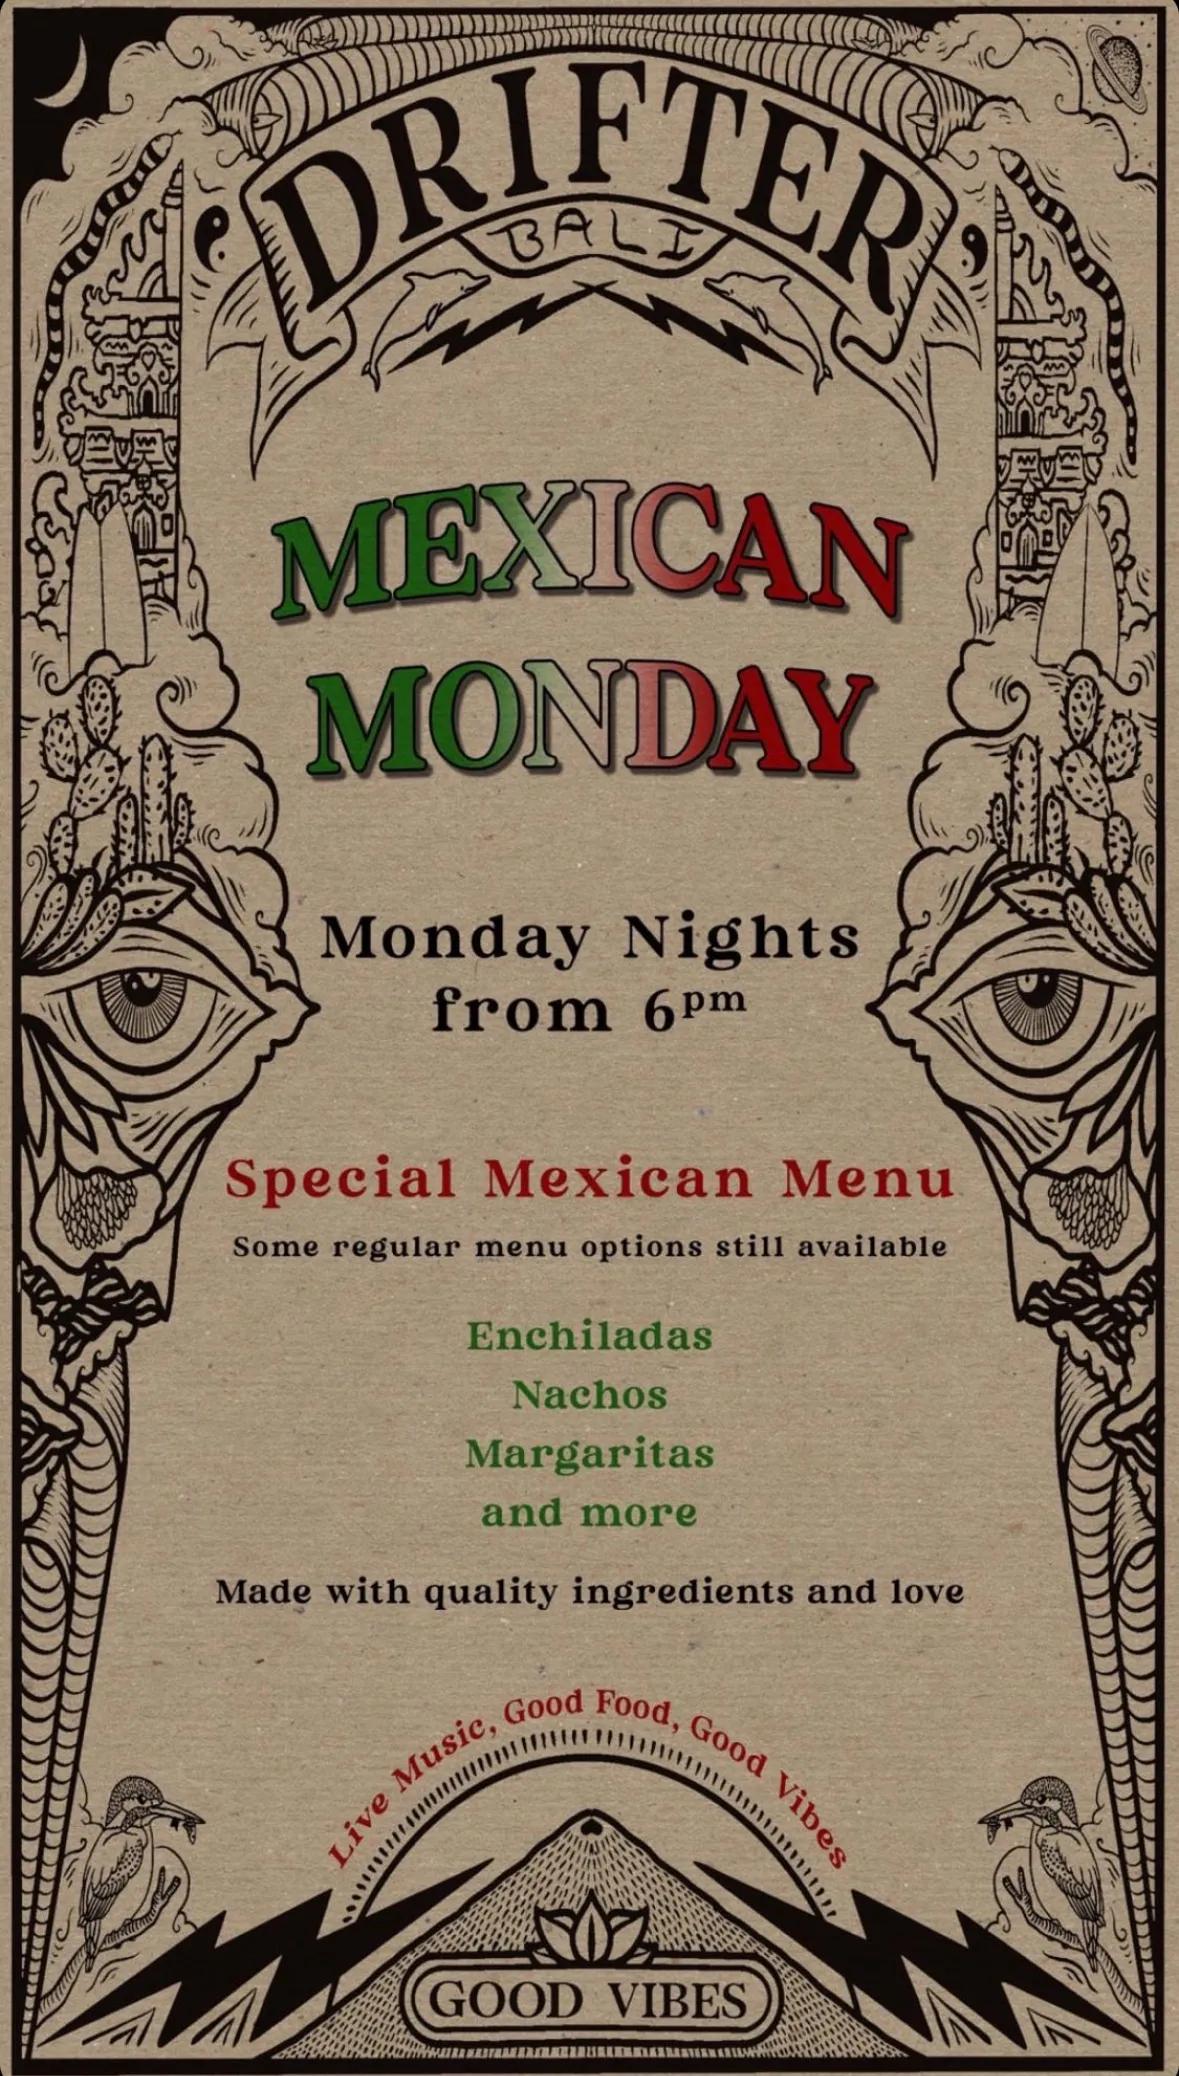 Event at Drifter Surf Shop Cafe & Gallery every Monday 2024: Mexican Monday